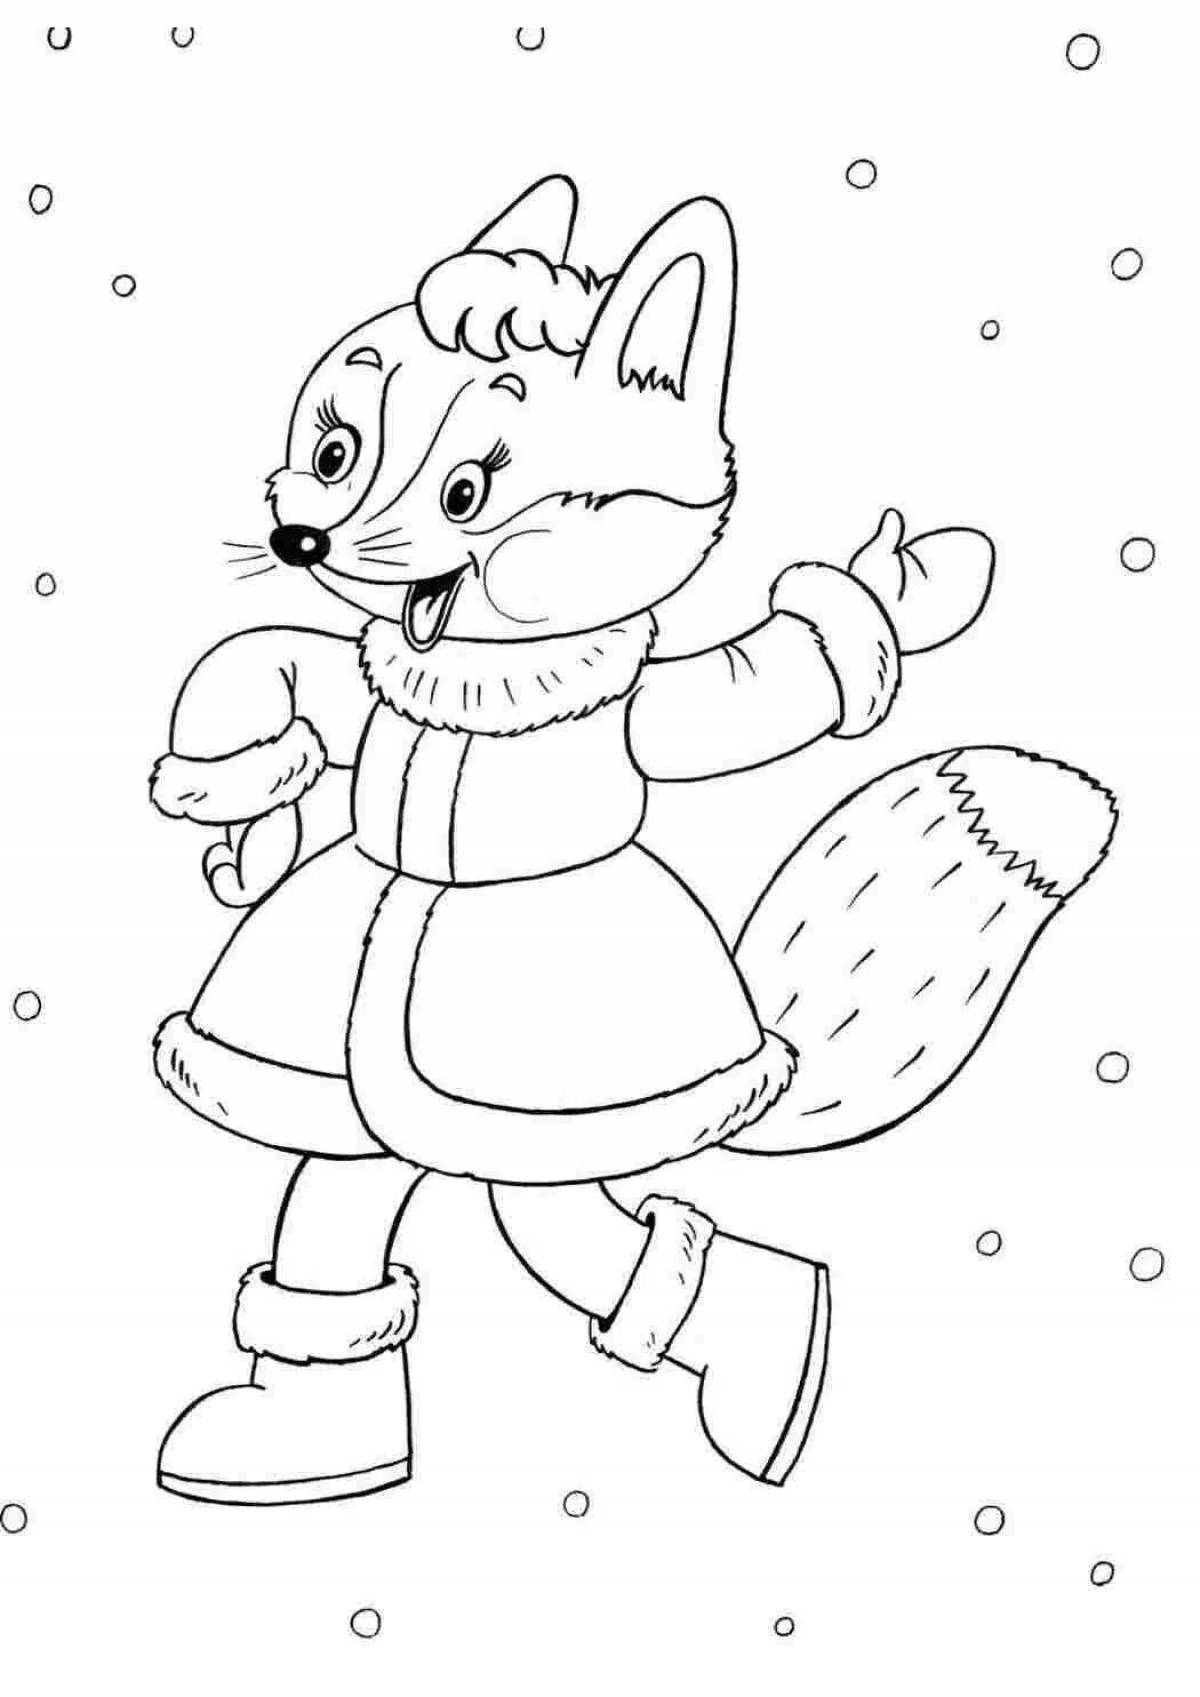 Colourful winter animals coloring book for 3-4 year olds